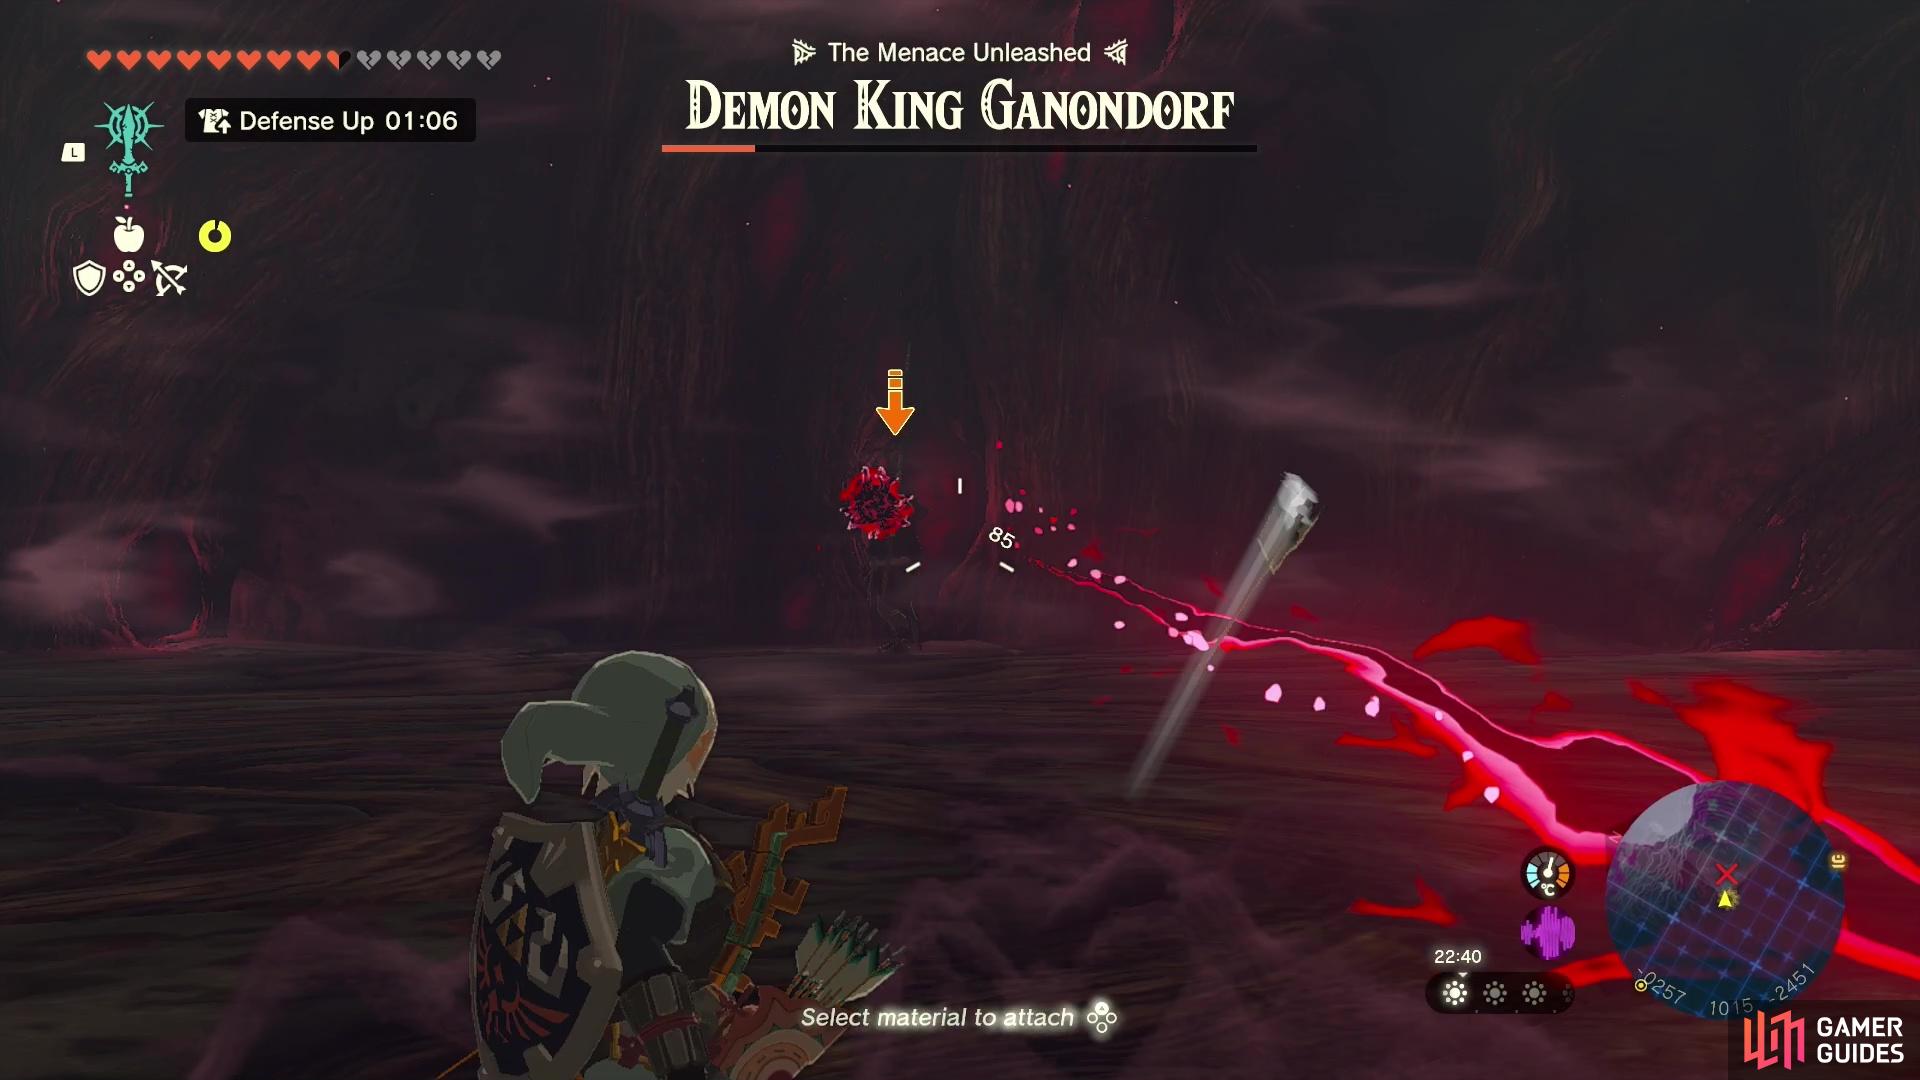 Ganondorf’s bow attacks will permanently remove your hearts for the duration of the fight…icky!